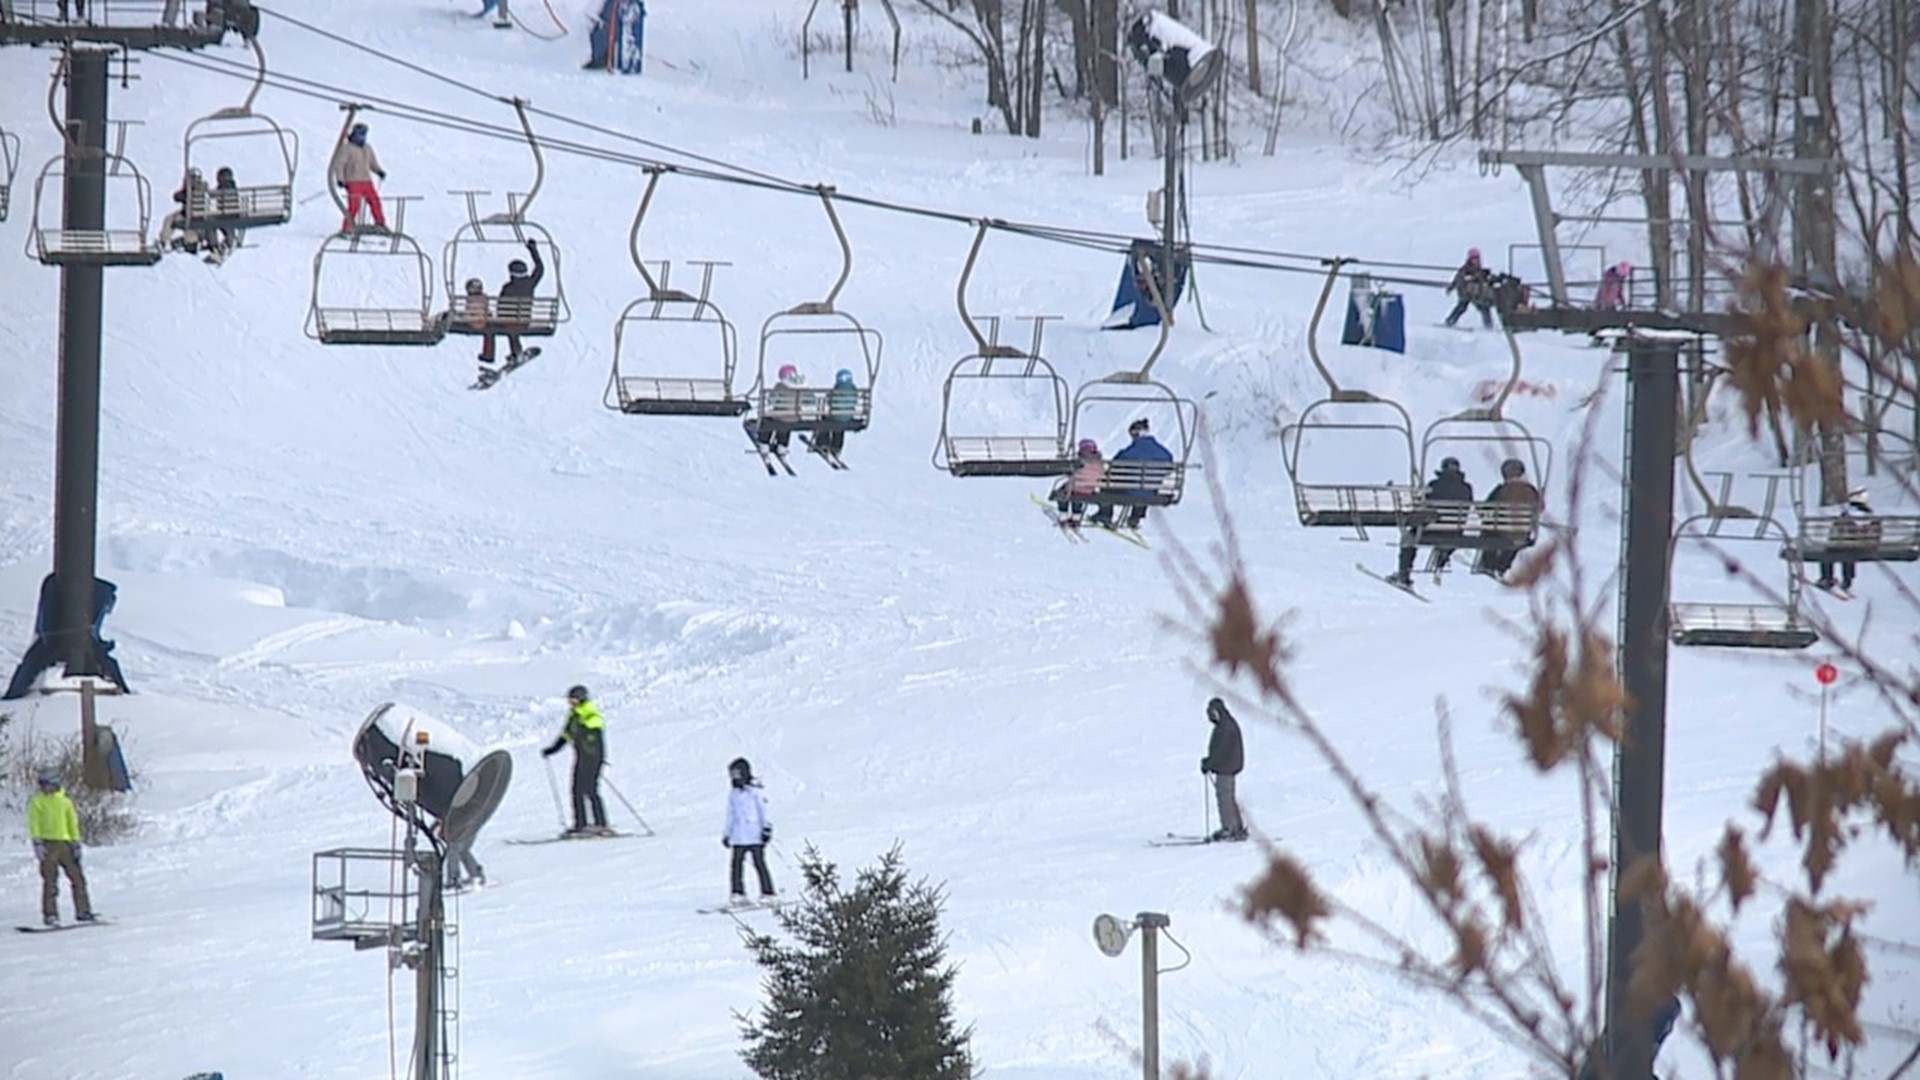 Skiers and snowboarders spent their weekends enjoying the fresh snow.